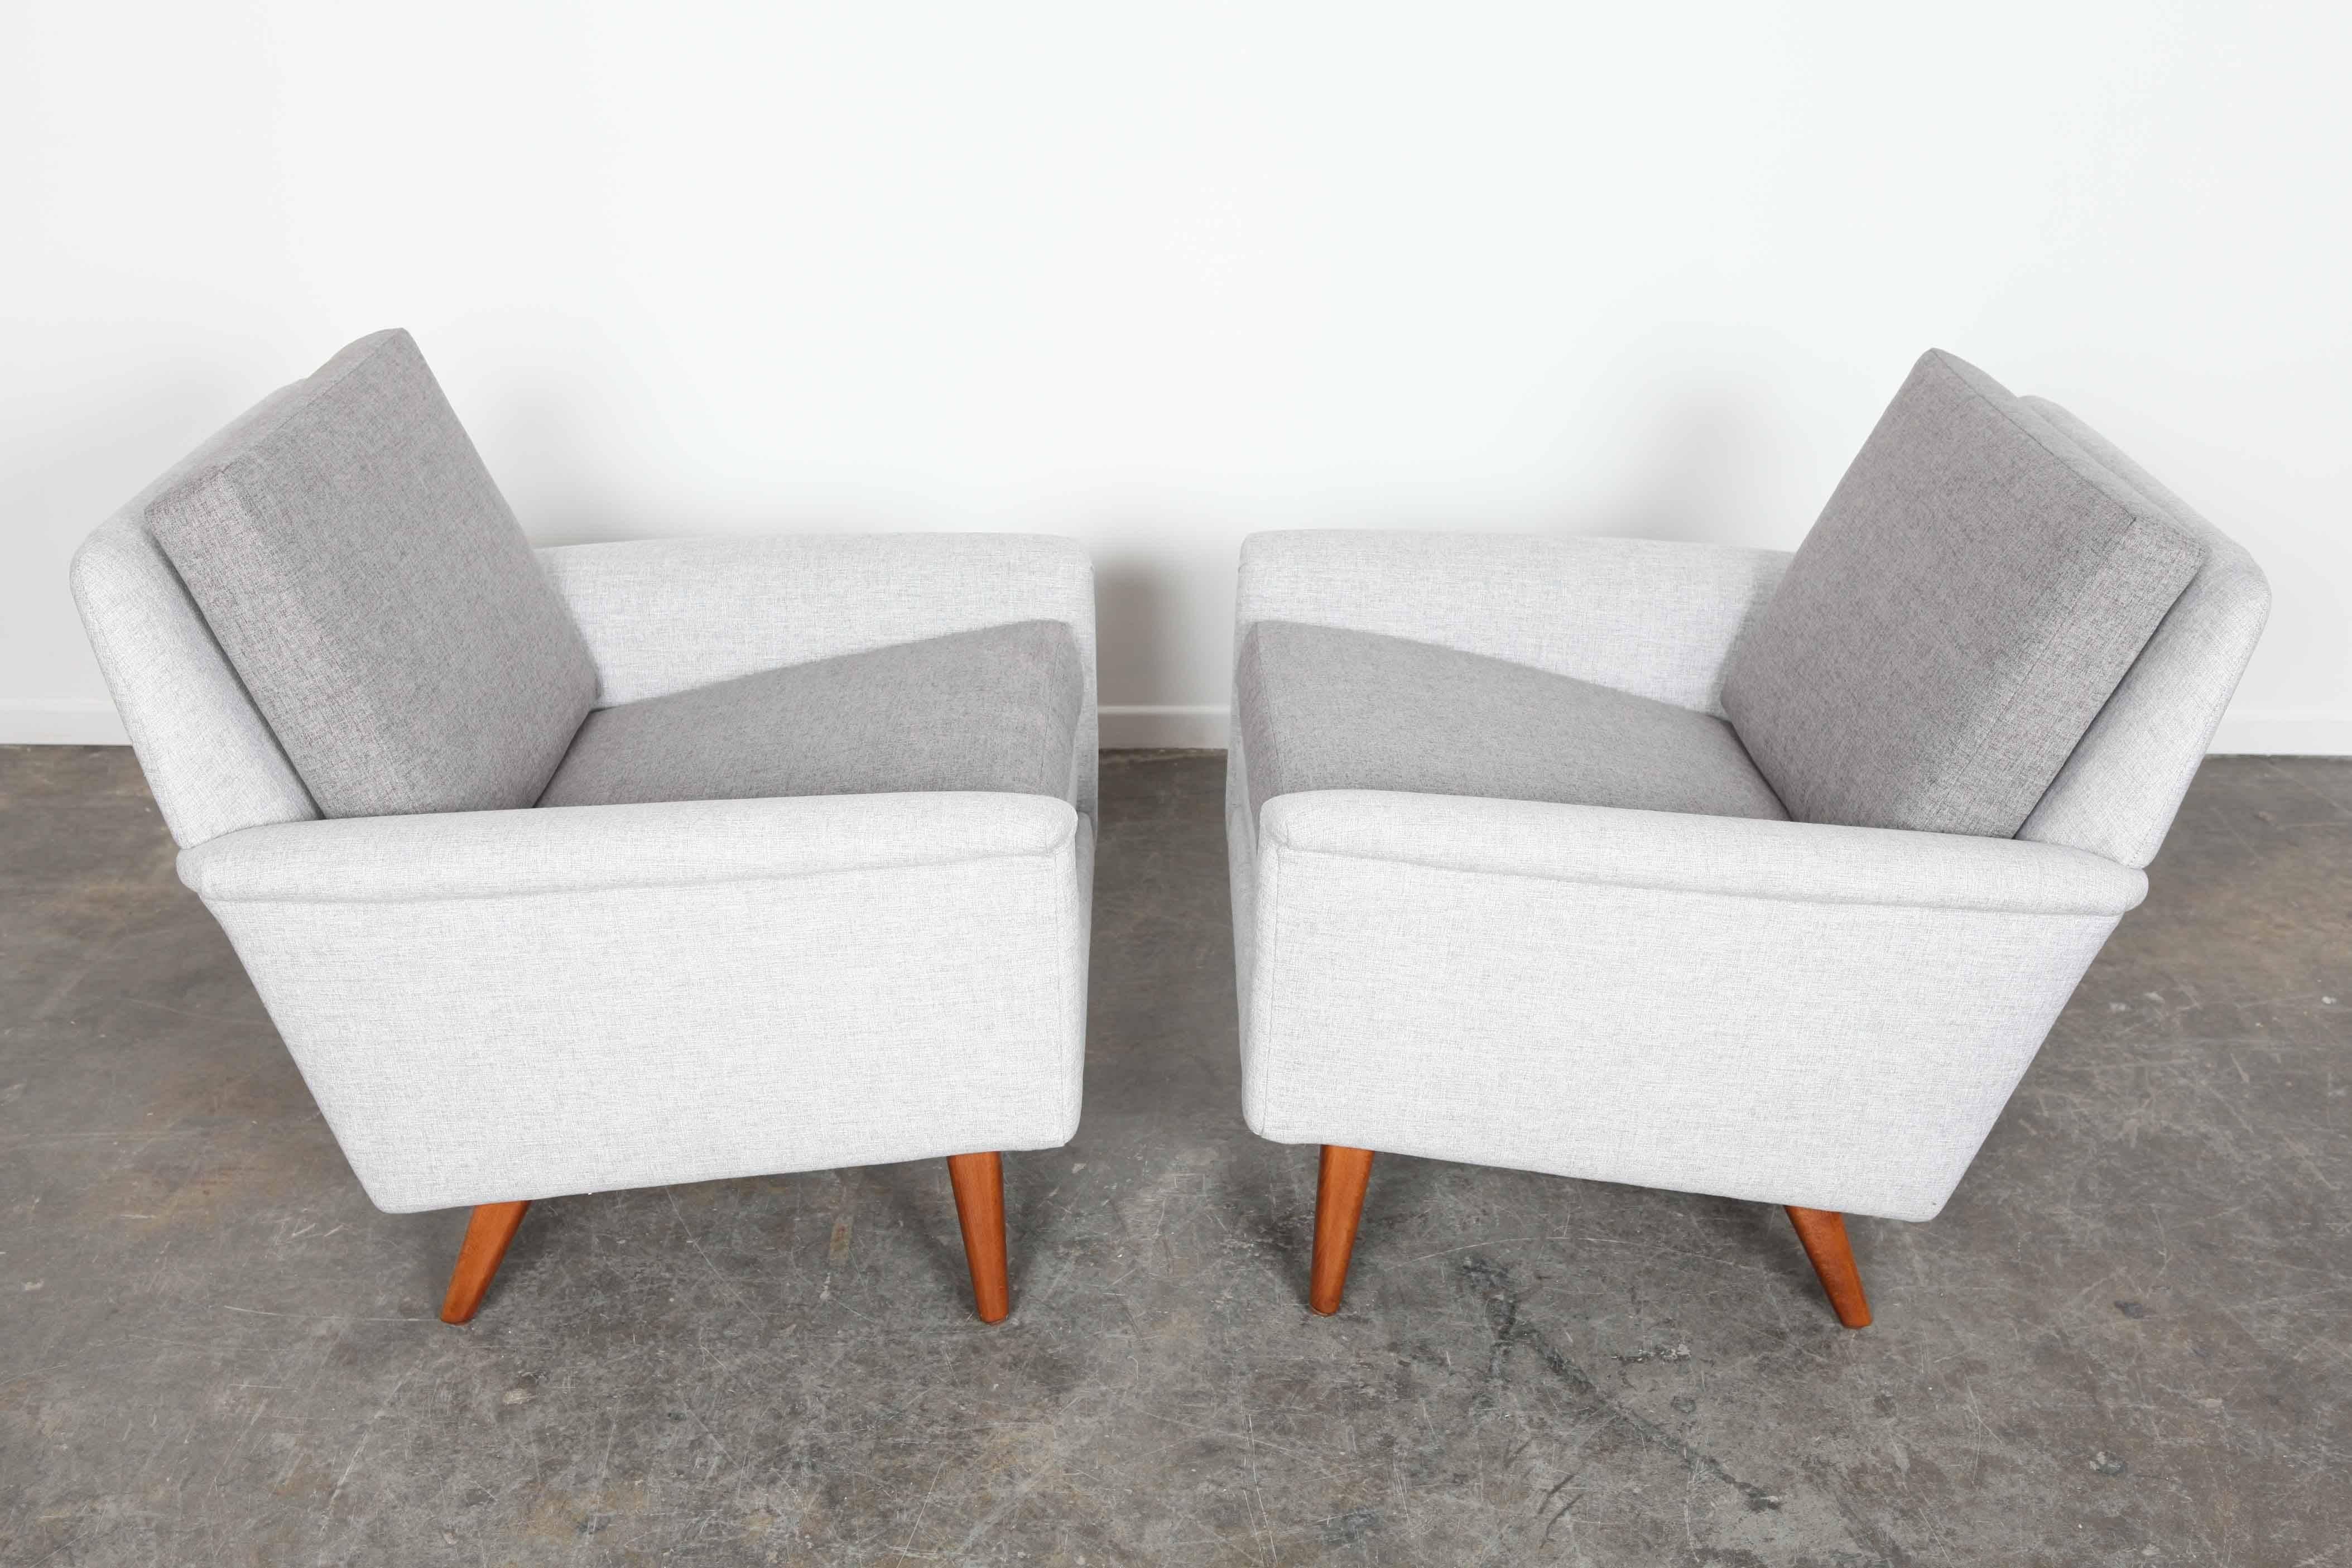 Pair of Swedish Mid-Century Modern Lounge Chairs by Folke Ohlsson for DUX 2